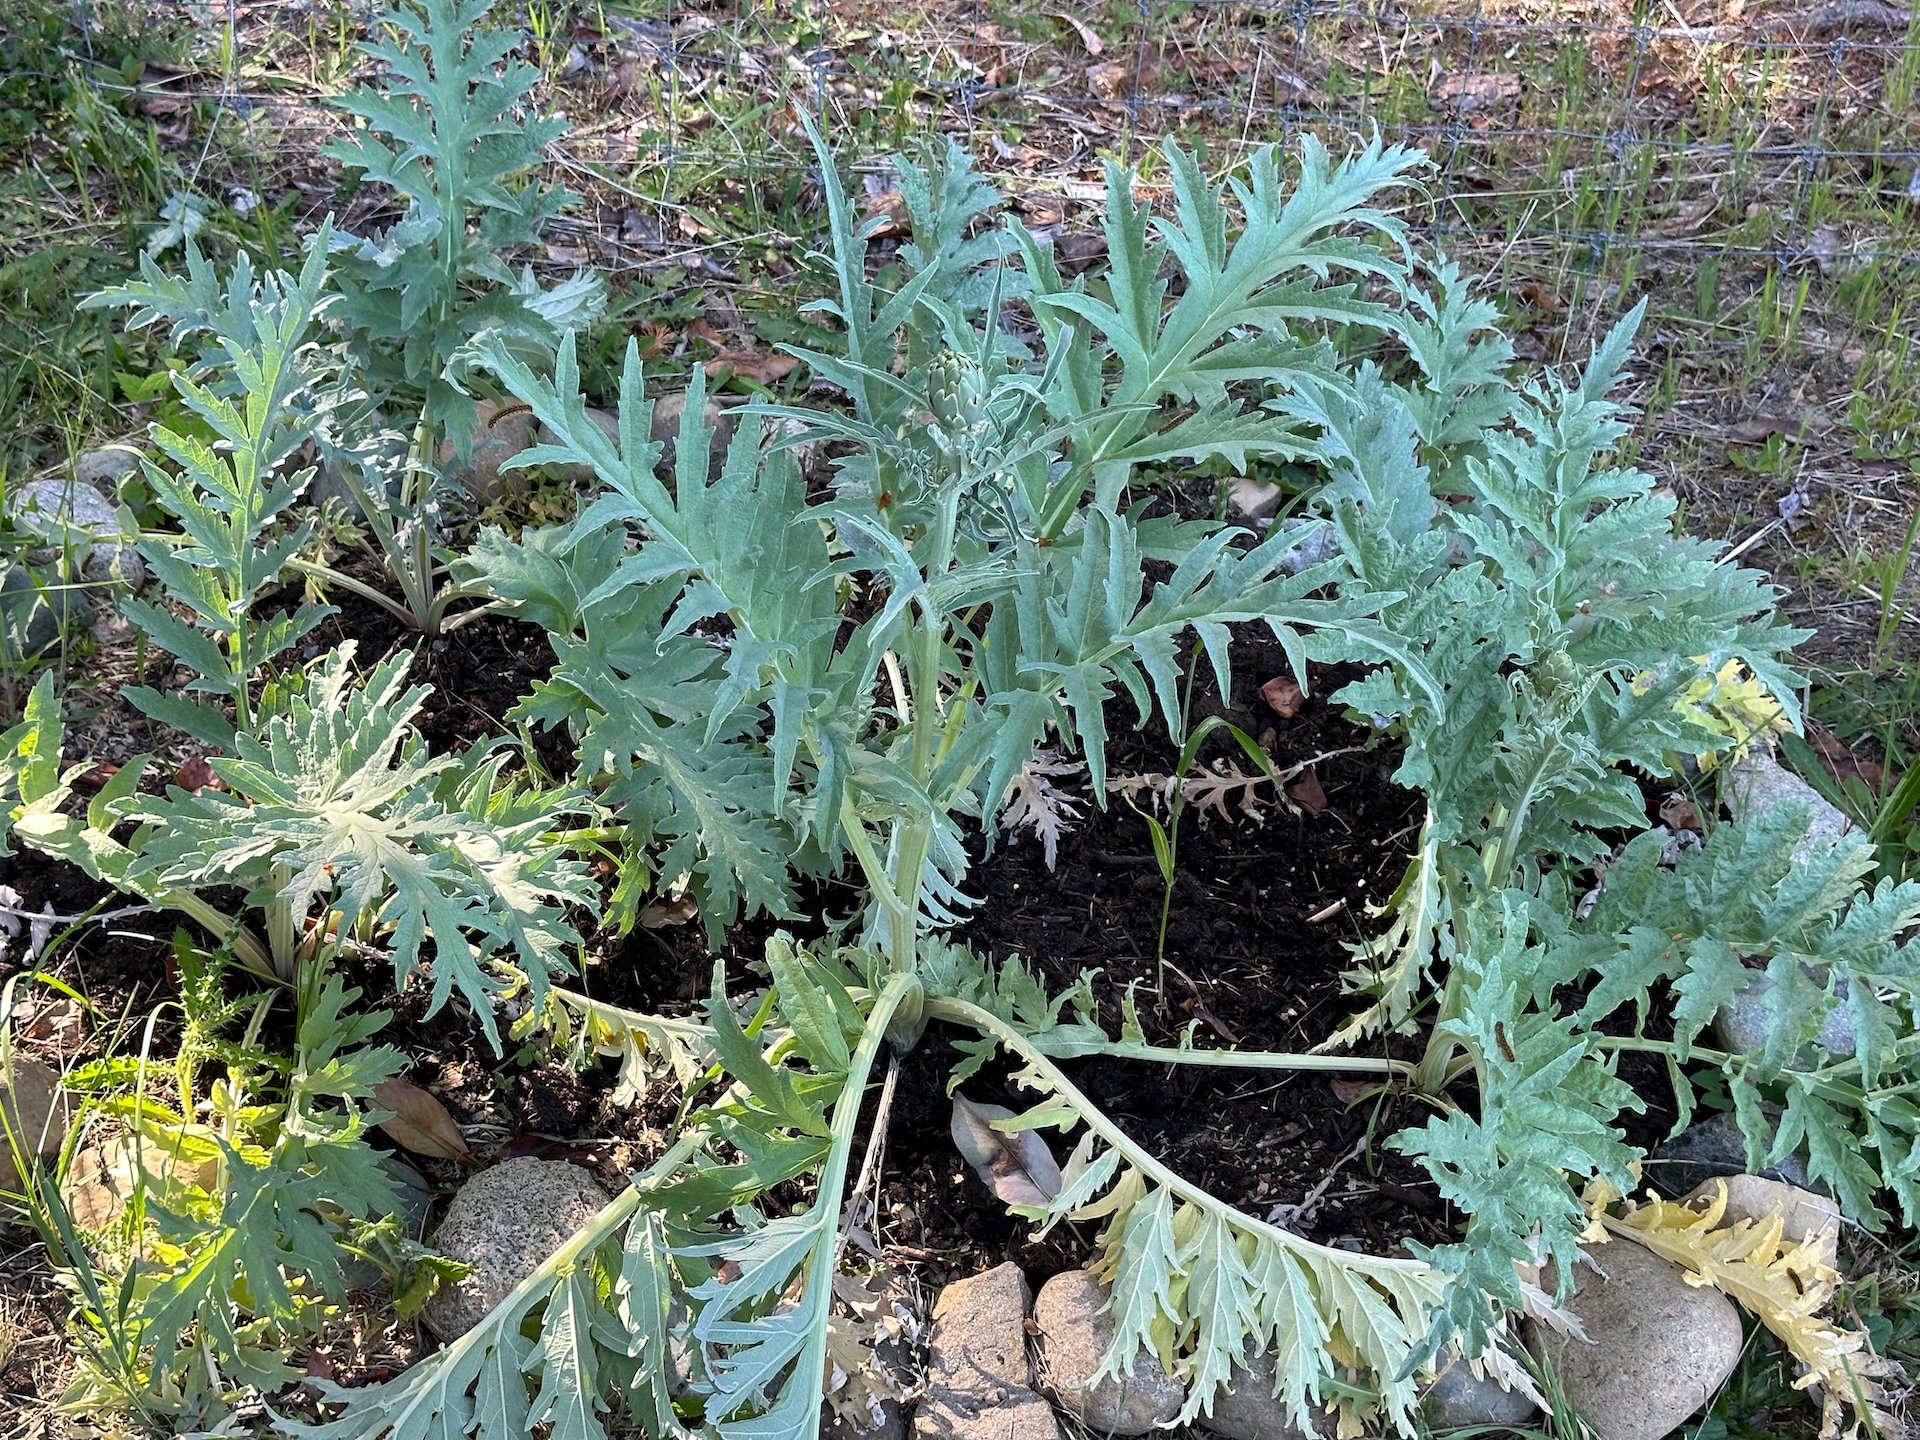  The artichokes are doing really well this year! 